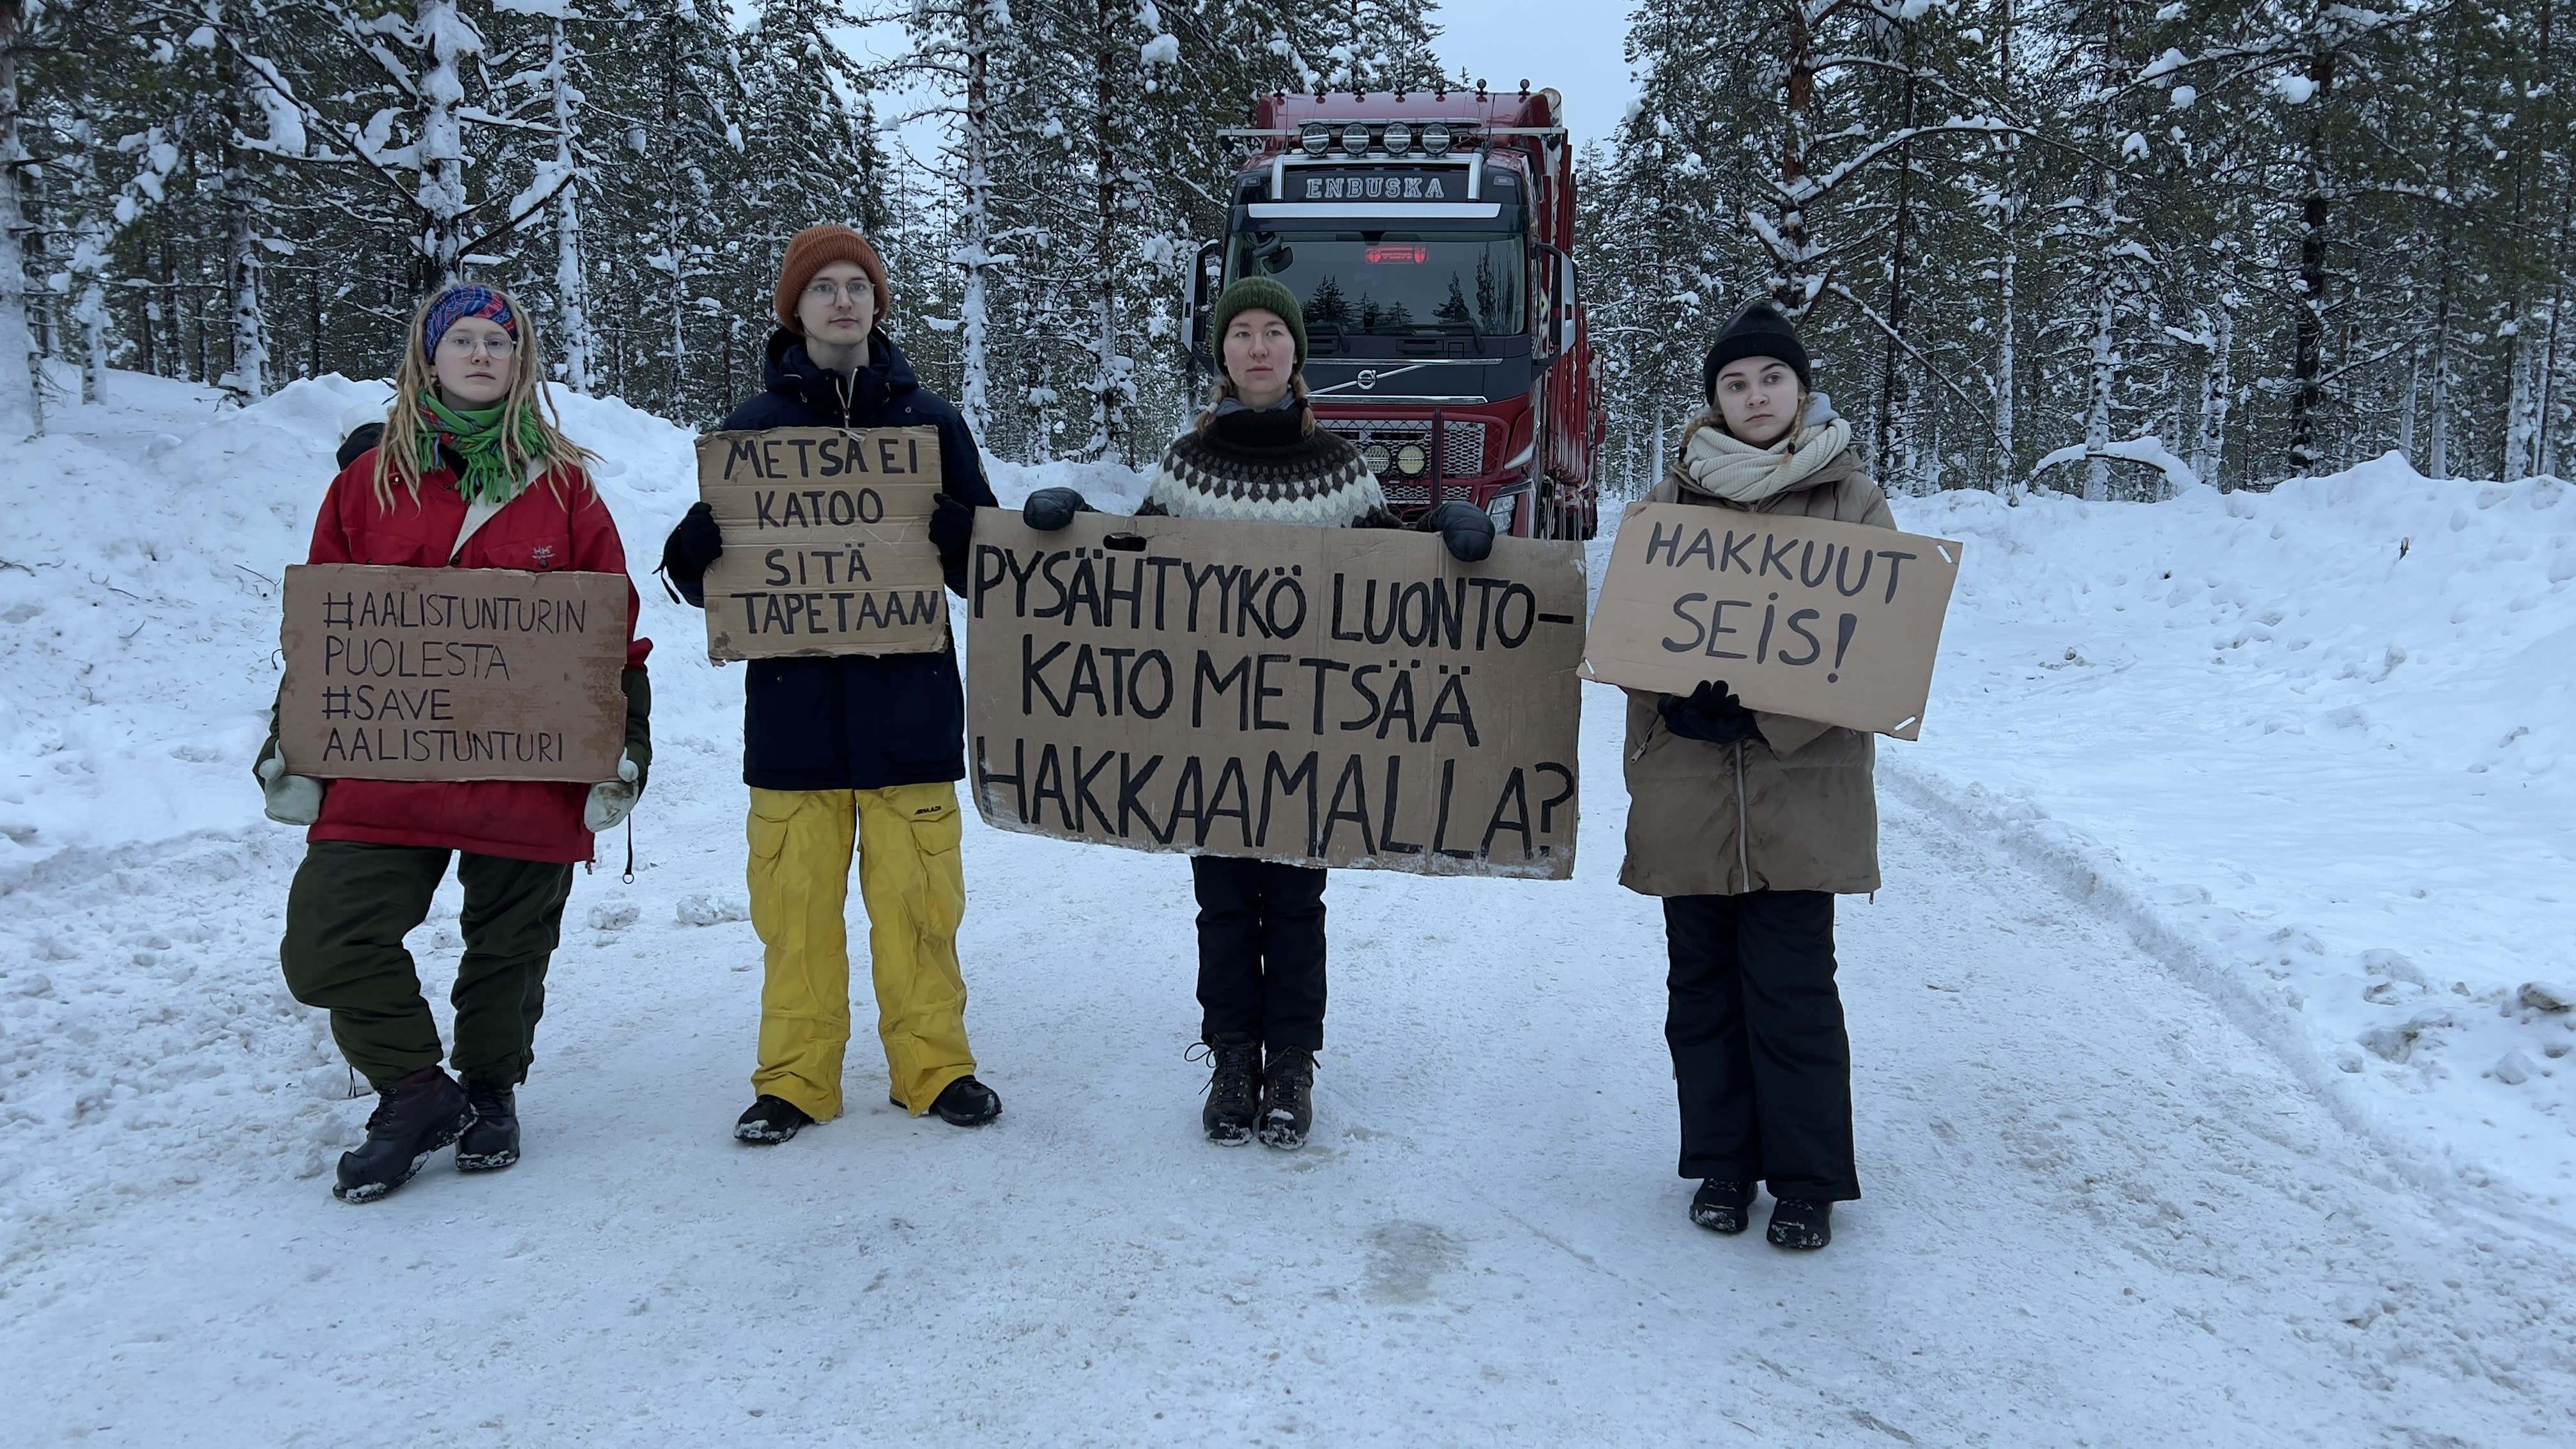 Activists stopped logging again at the Lapland construction site